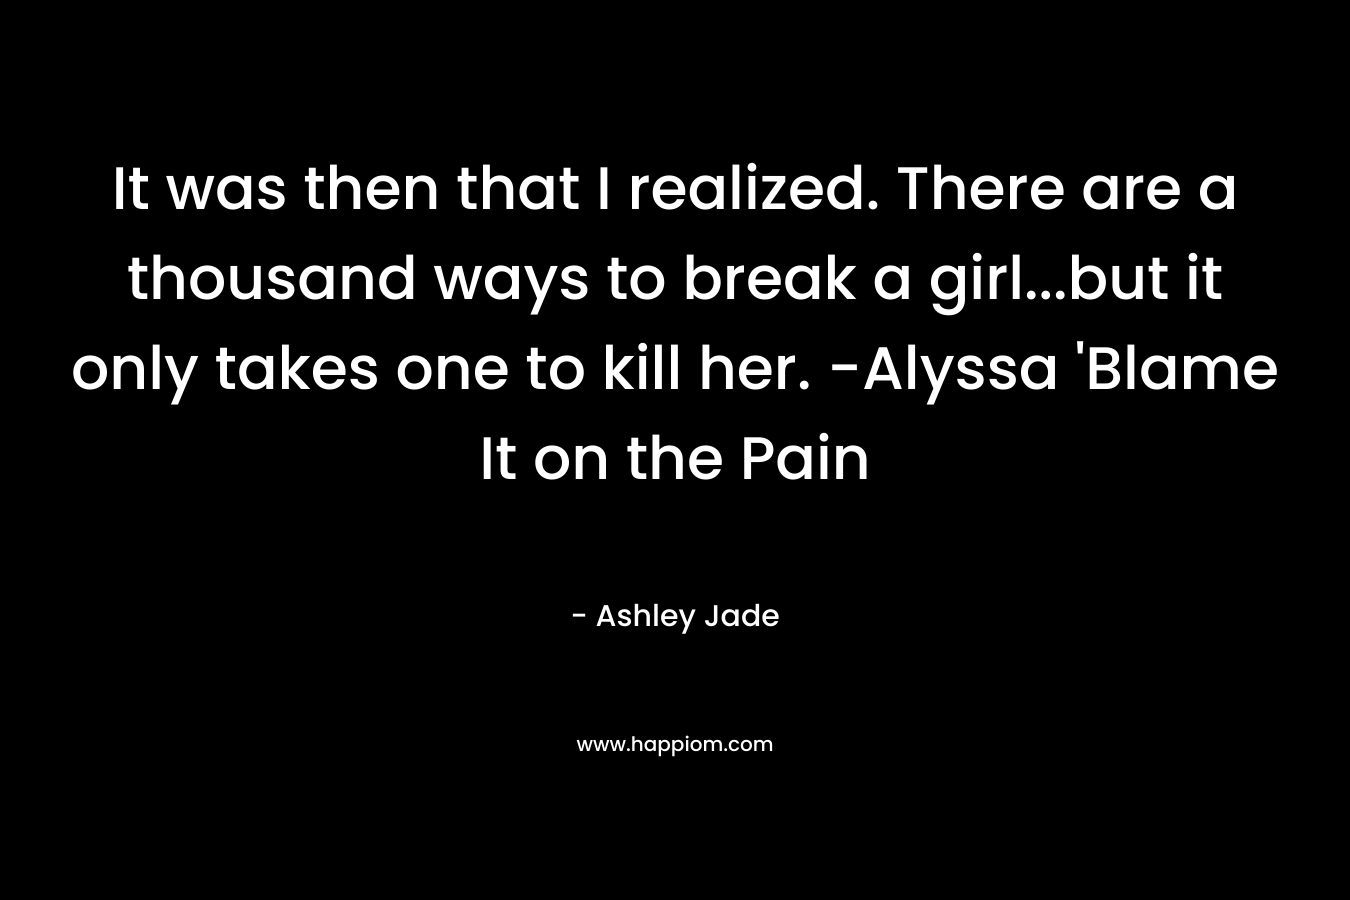 It was then that I realized. There are a thousand ways to break a girl...but it only takes one to kill her. -Alyssa 'Blame It on the Pain